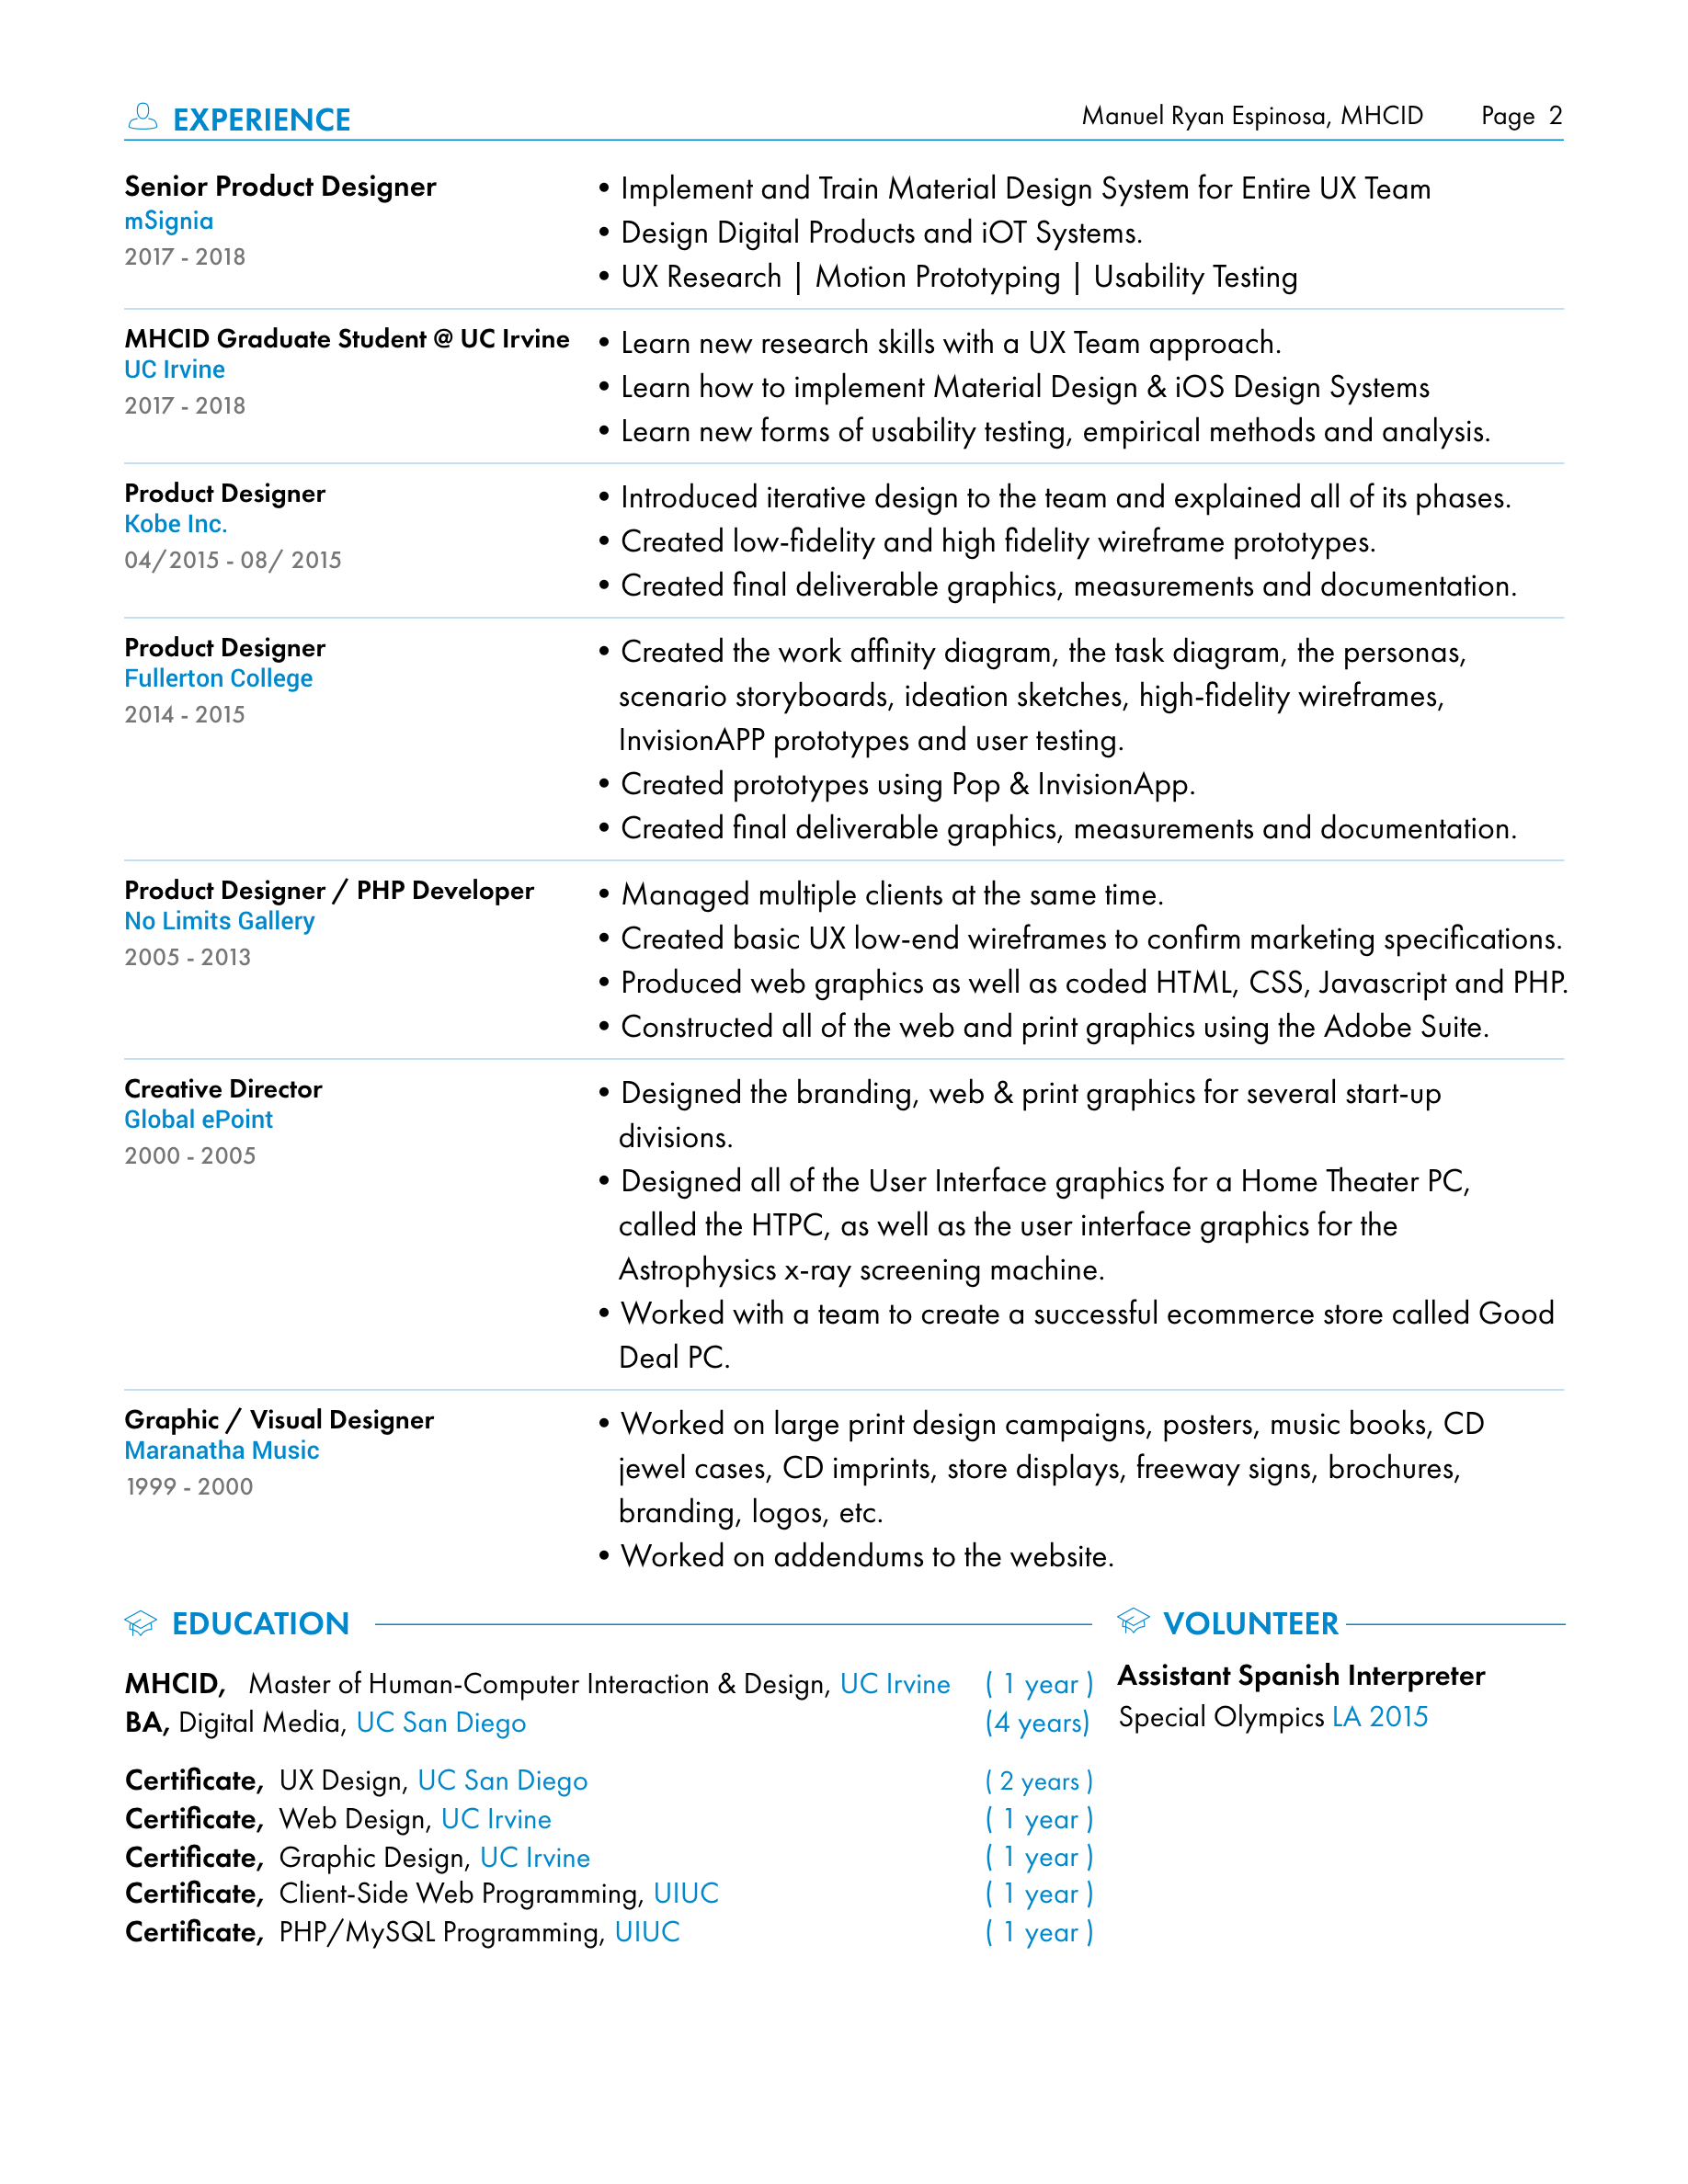 Resume user experience director